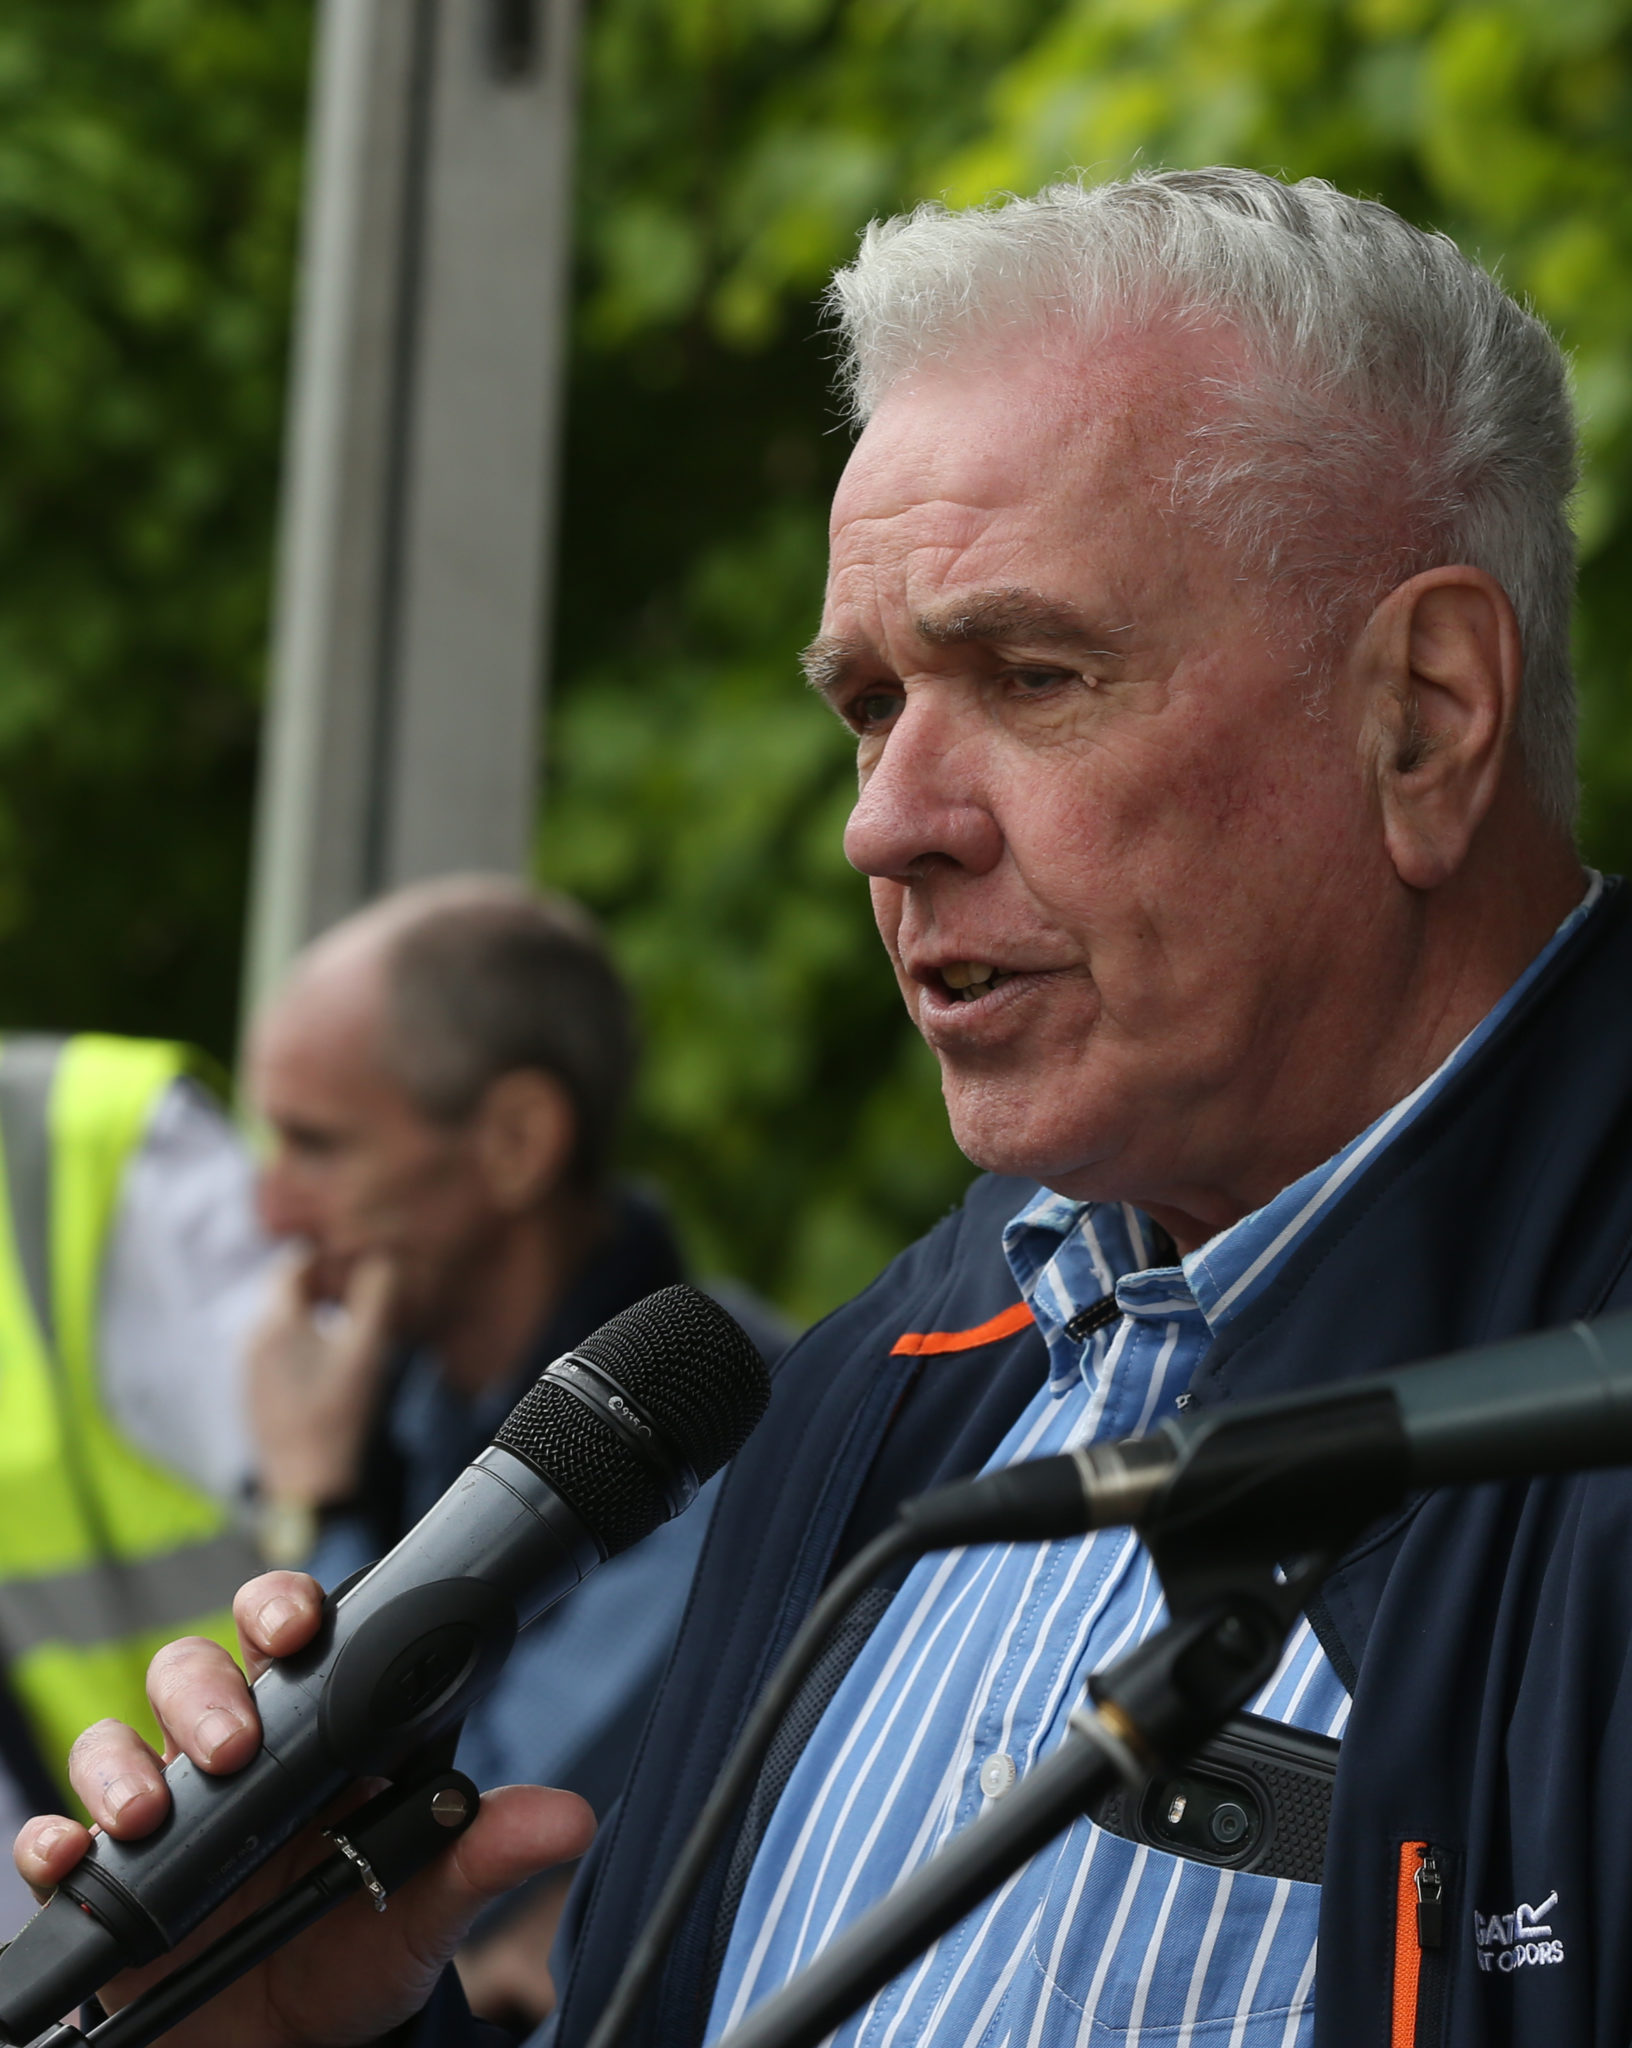 Fr Peter McVerry speaking to activists at the Raise the Roof protest.